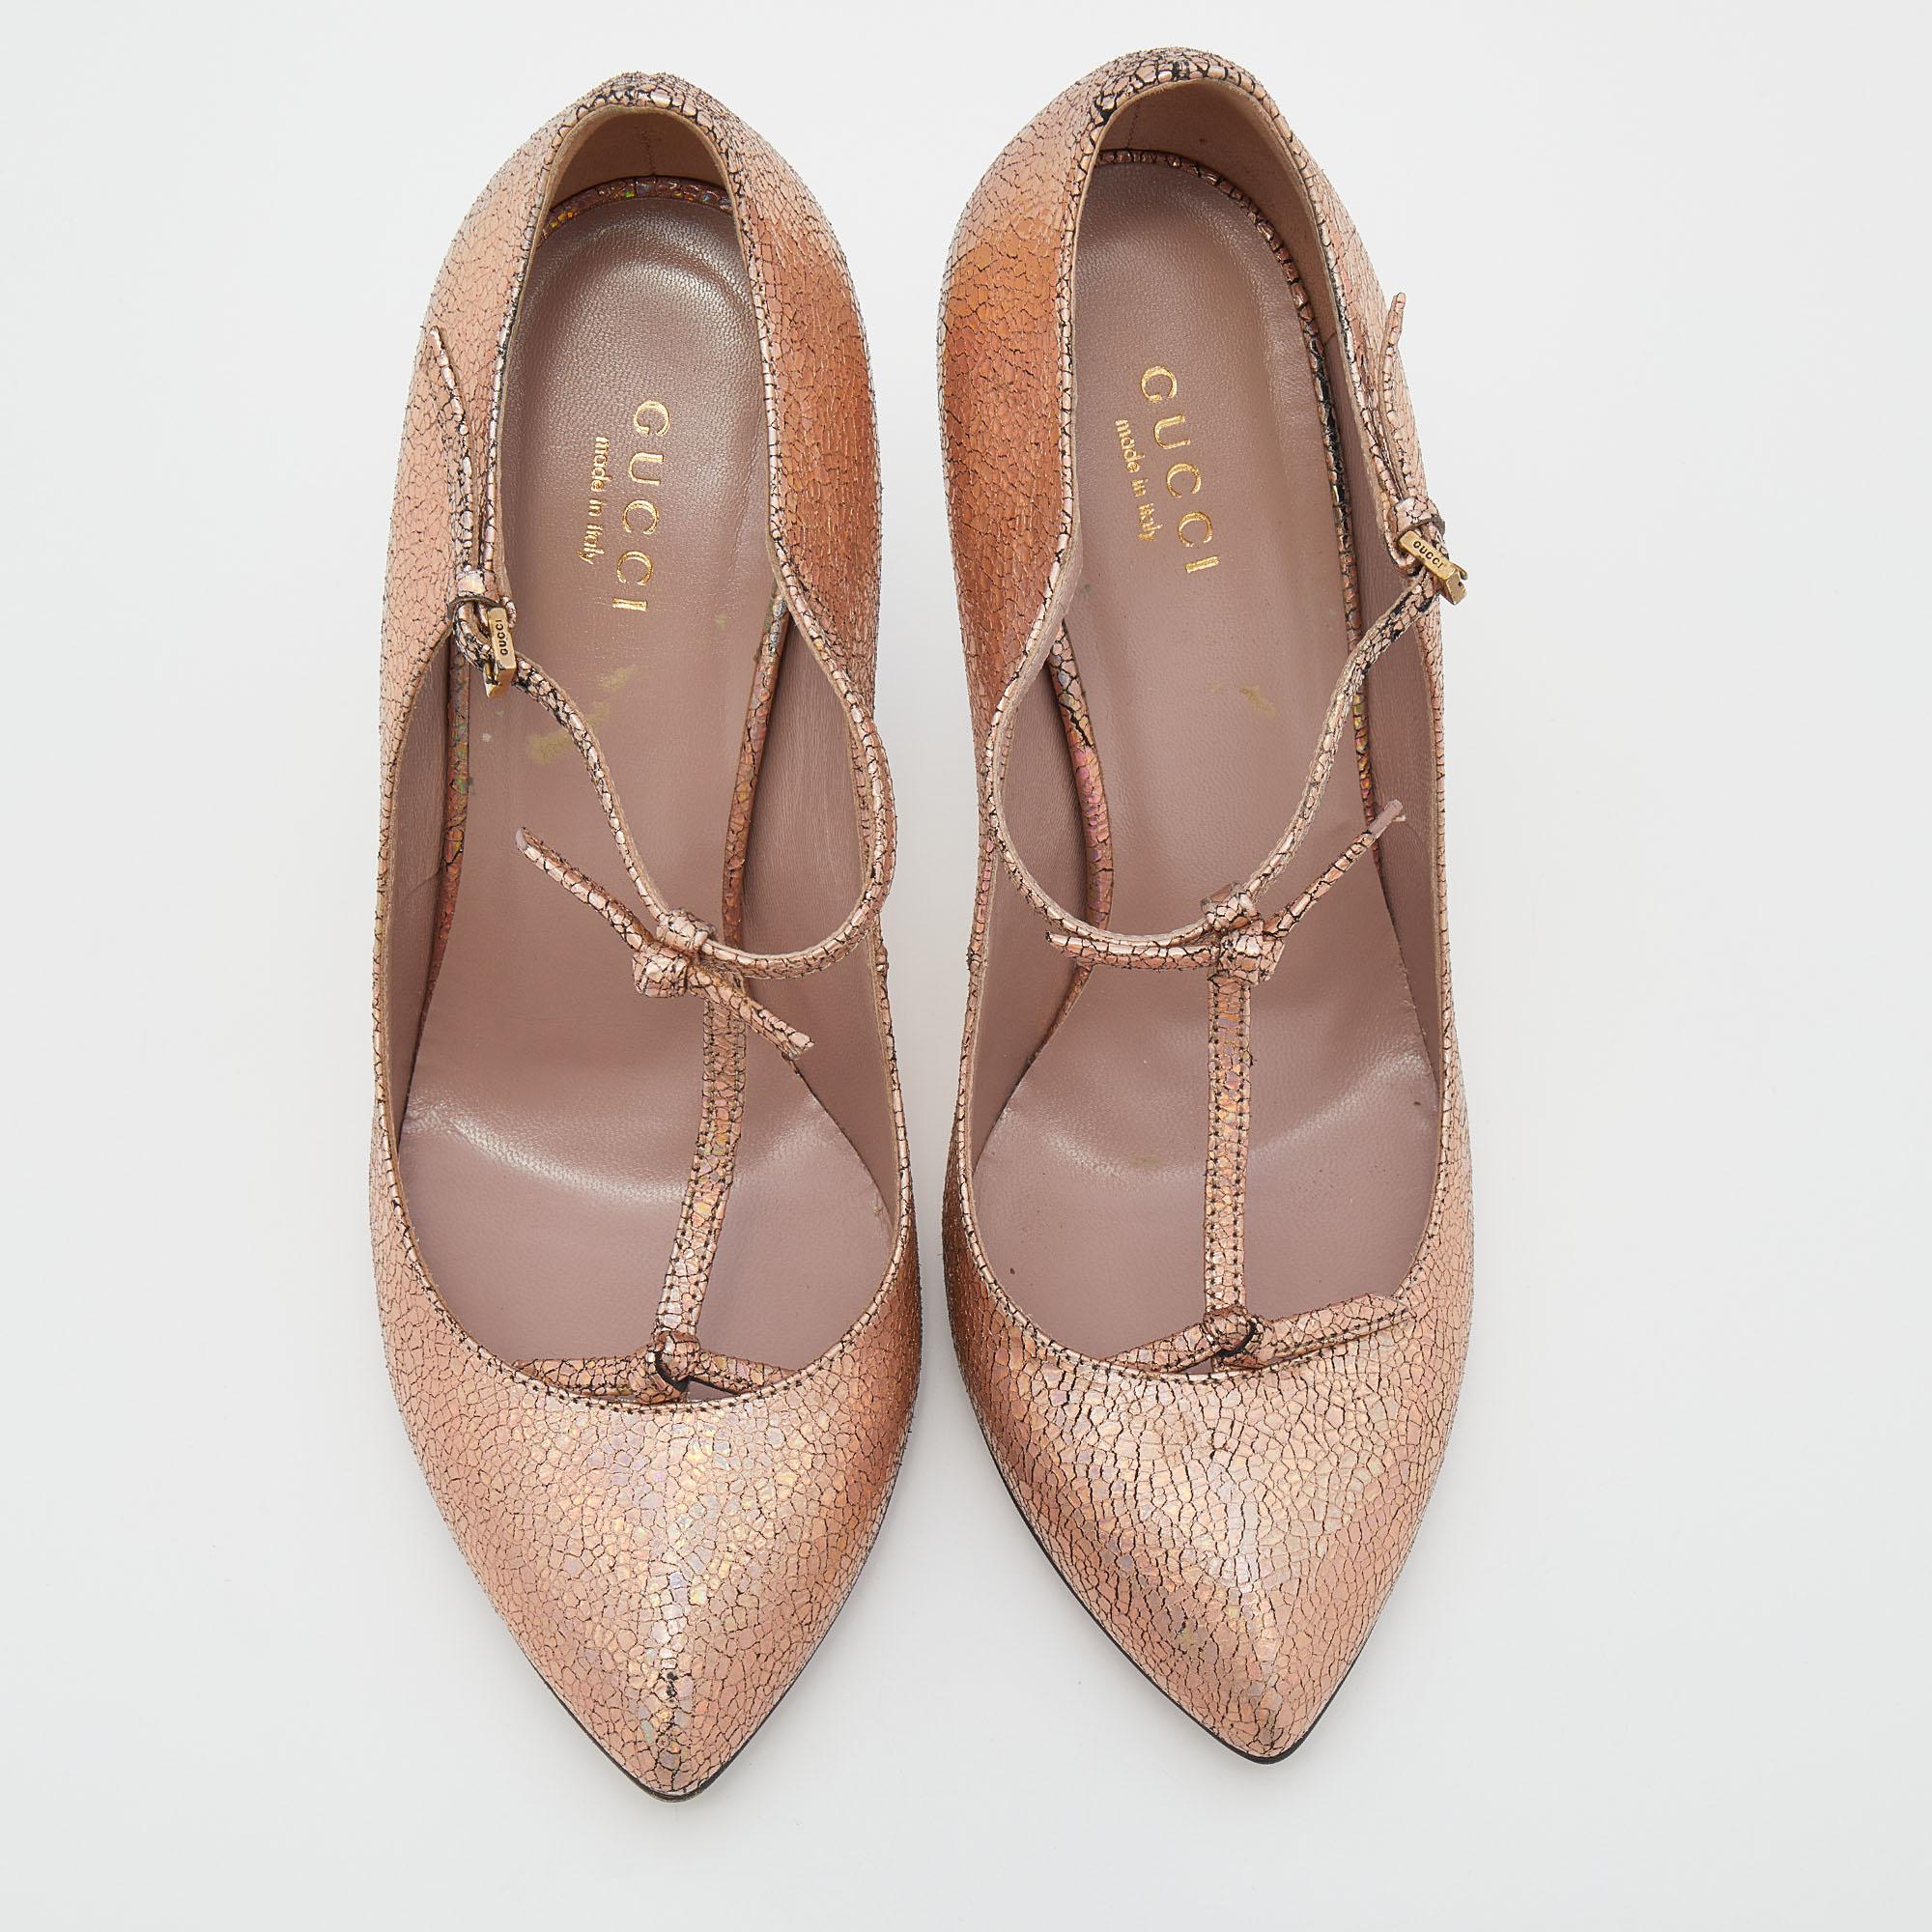 This amazing pair of Beverly pumps is from Gucci. The shimmering pumps are crafted from crackled leather and come with T-straps at the front. They feature ankle straps with buckle fastening, slim heels, and leather-lined insoles. Team them up with